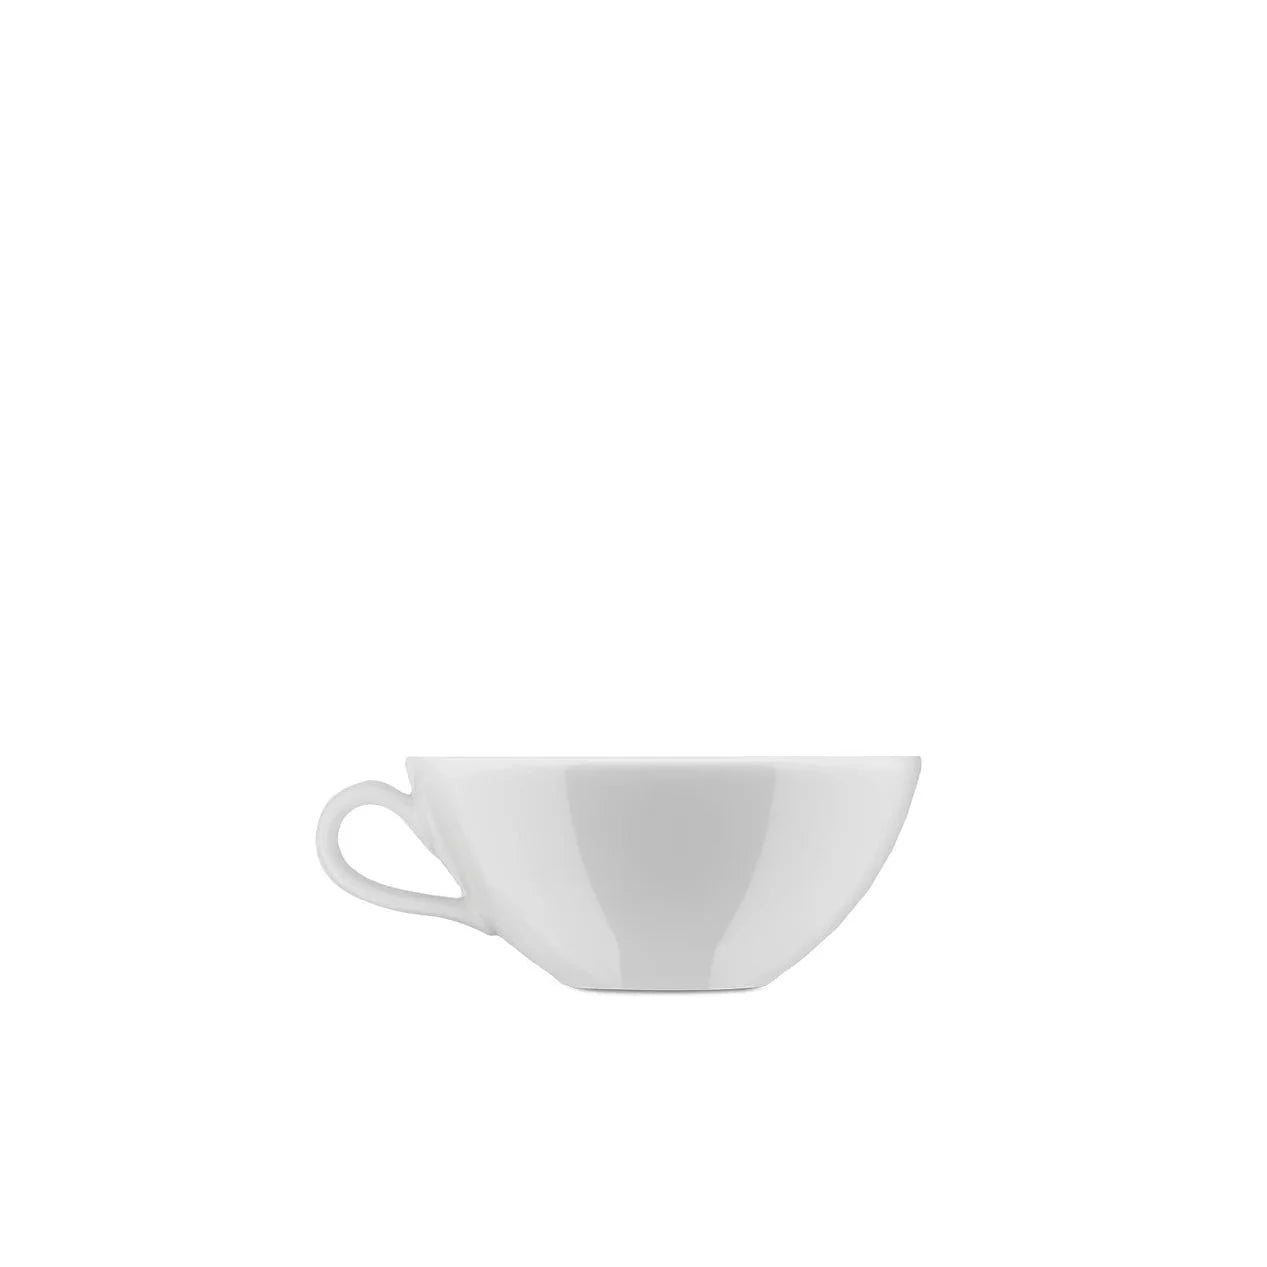 Alessi White Porcelain Coffee Tea Cup and Saucer MAMI Collection | Panik Design